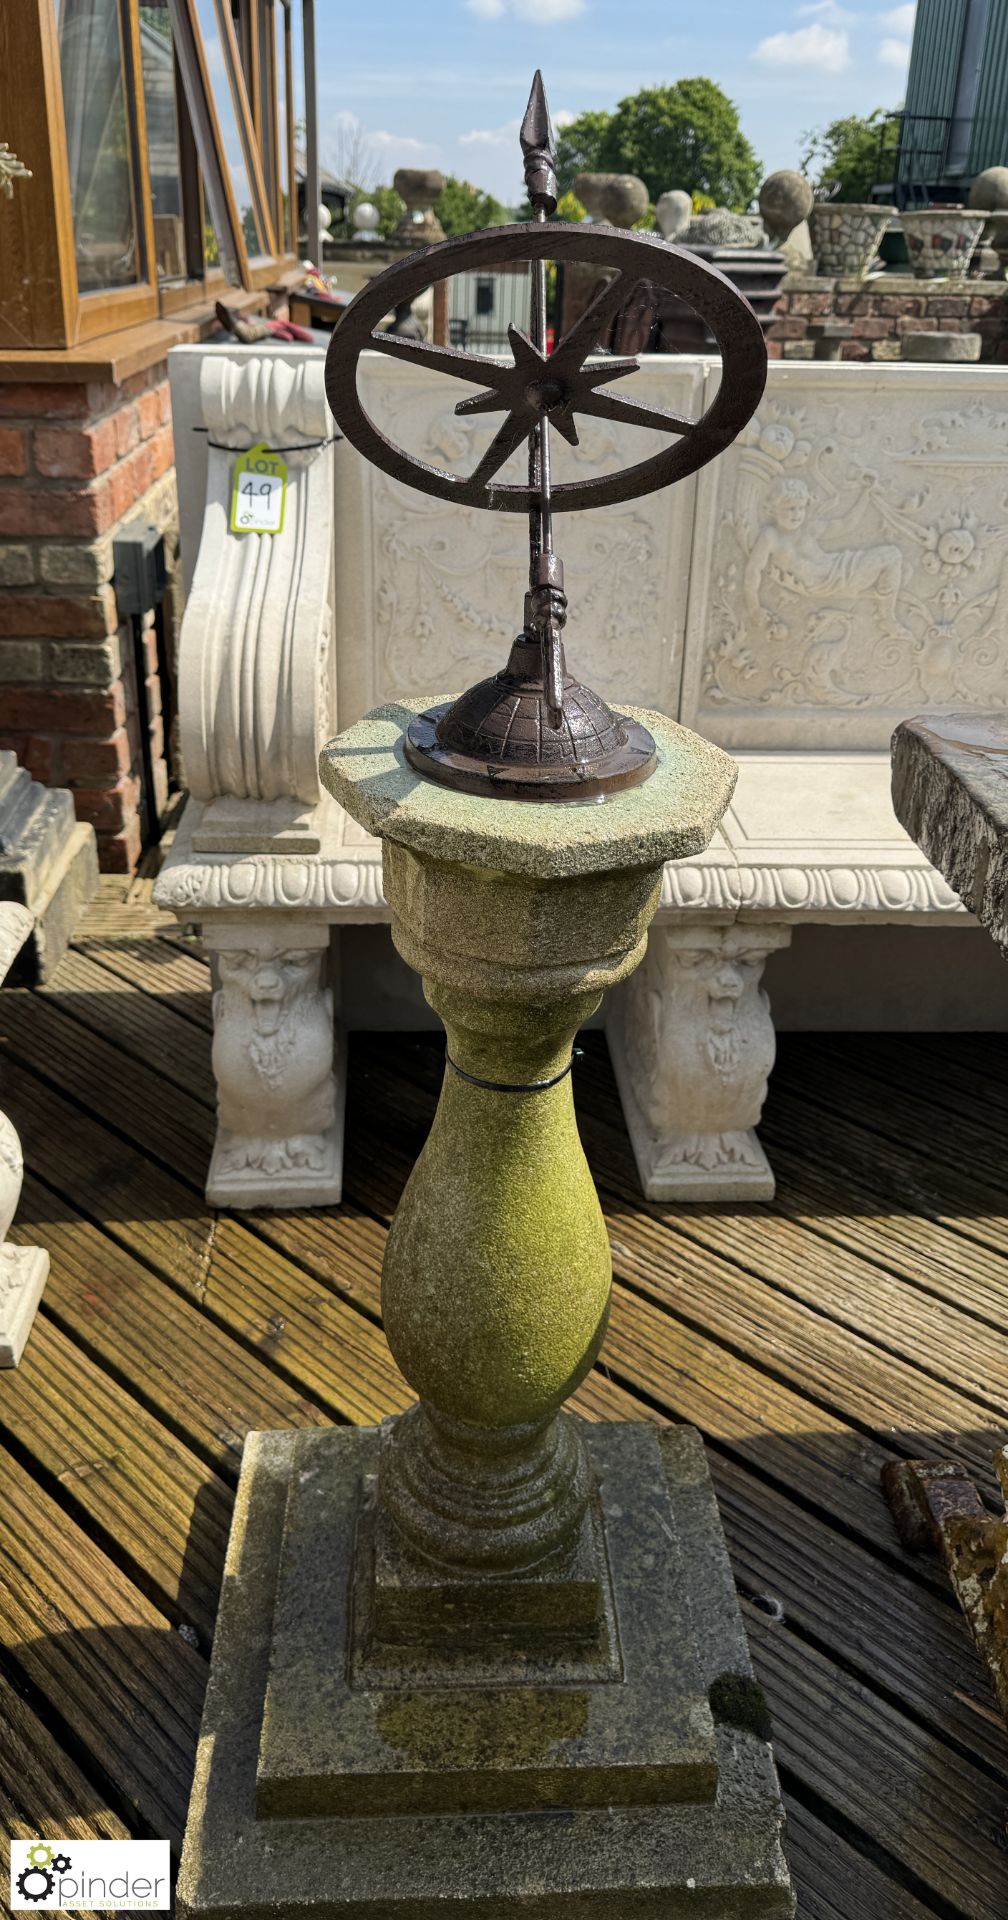 A reconstituted stone Balustrade with cast iron armillary top, approx. 49in, circa mid 1900s - Image 3 of 7